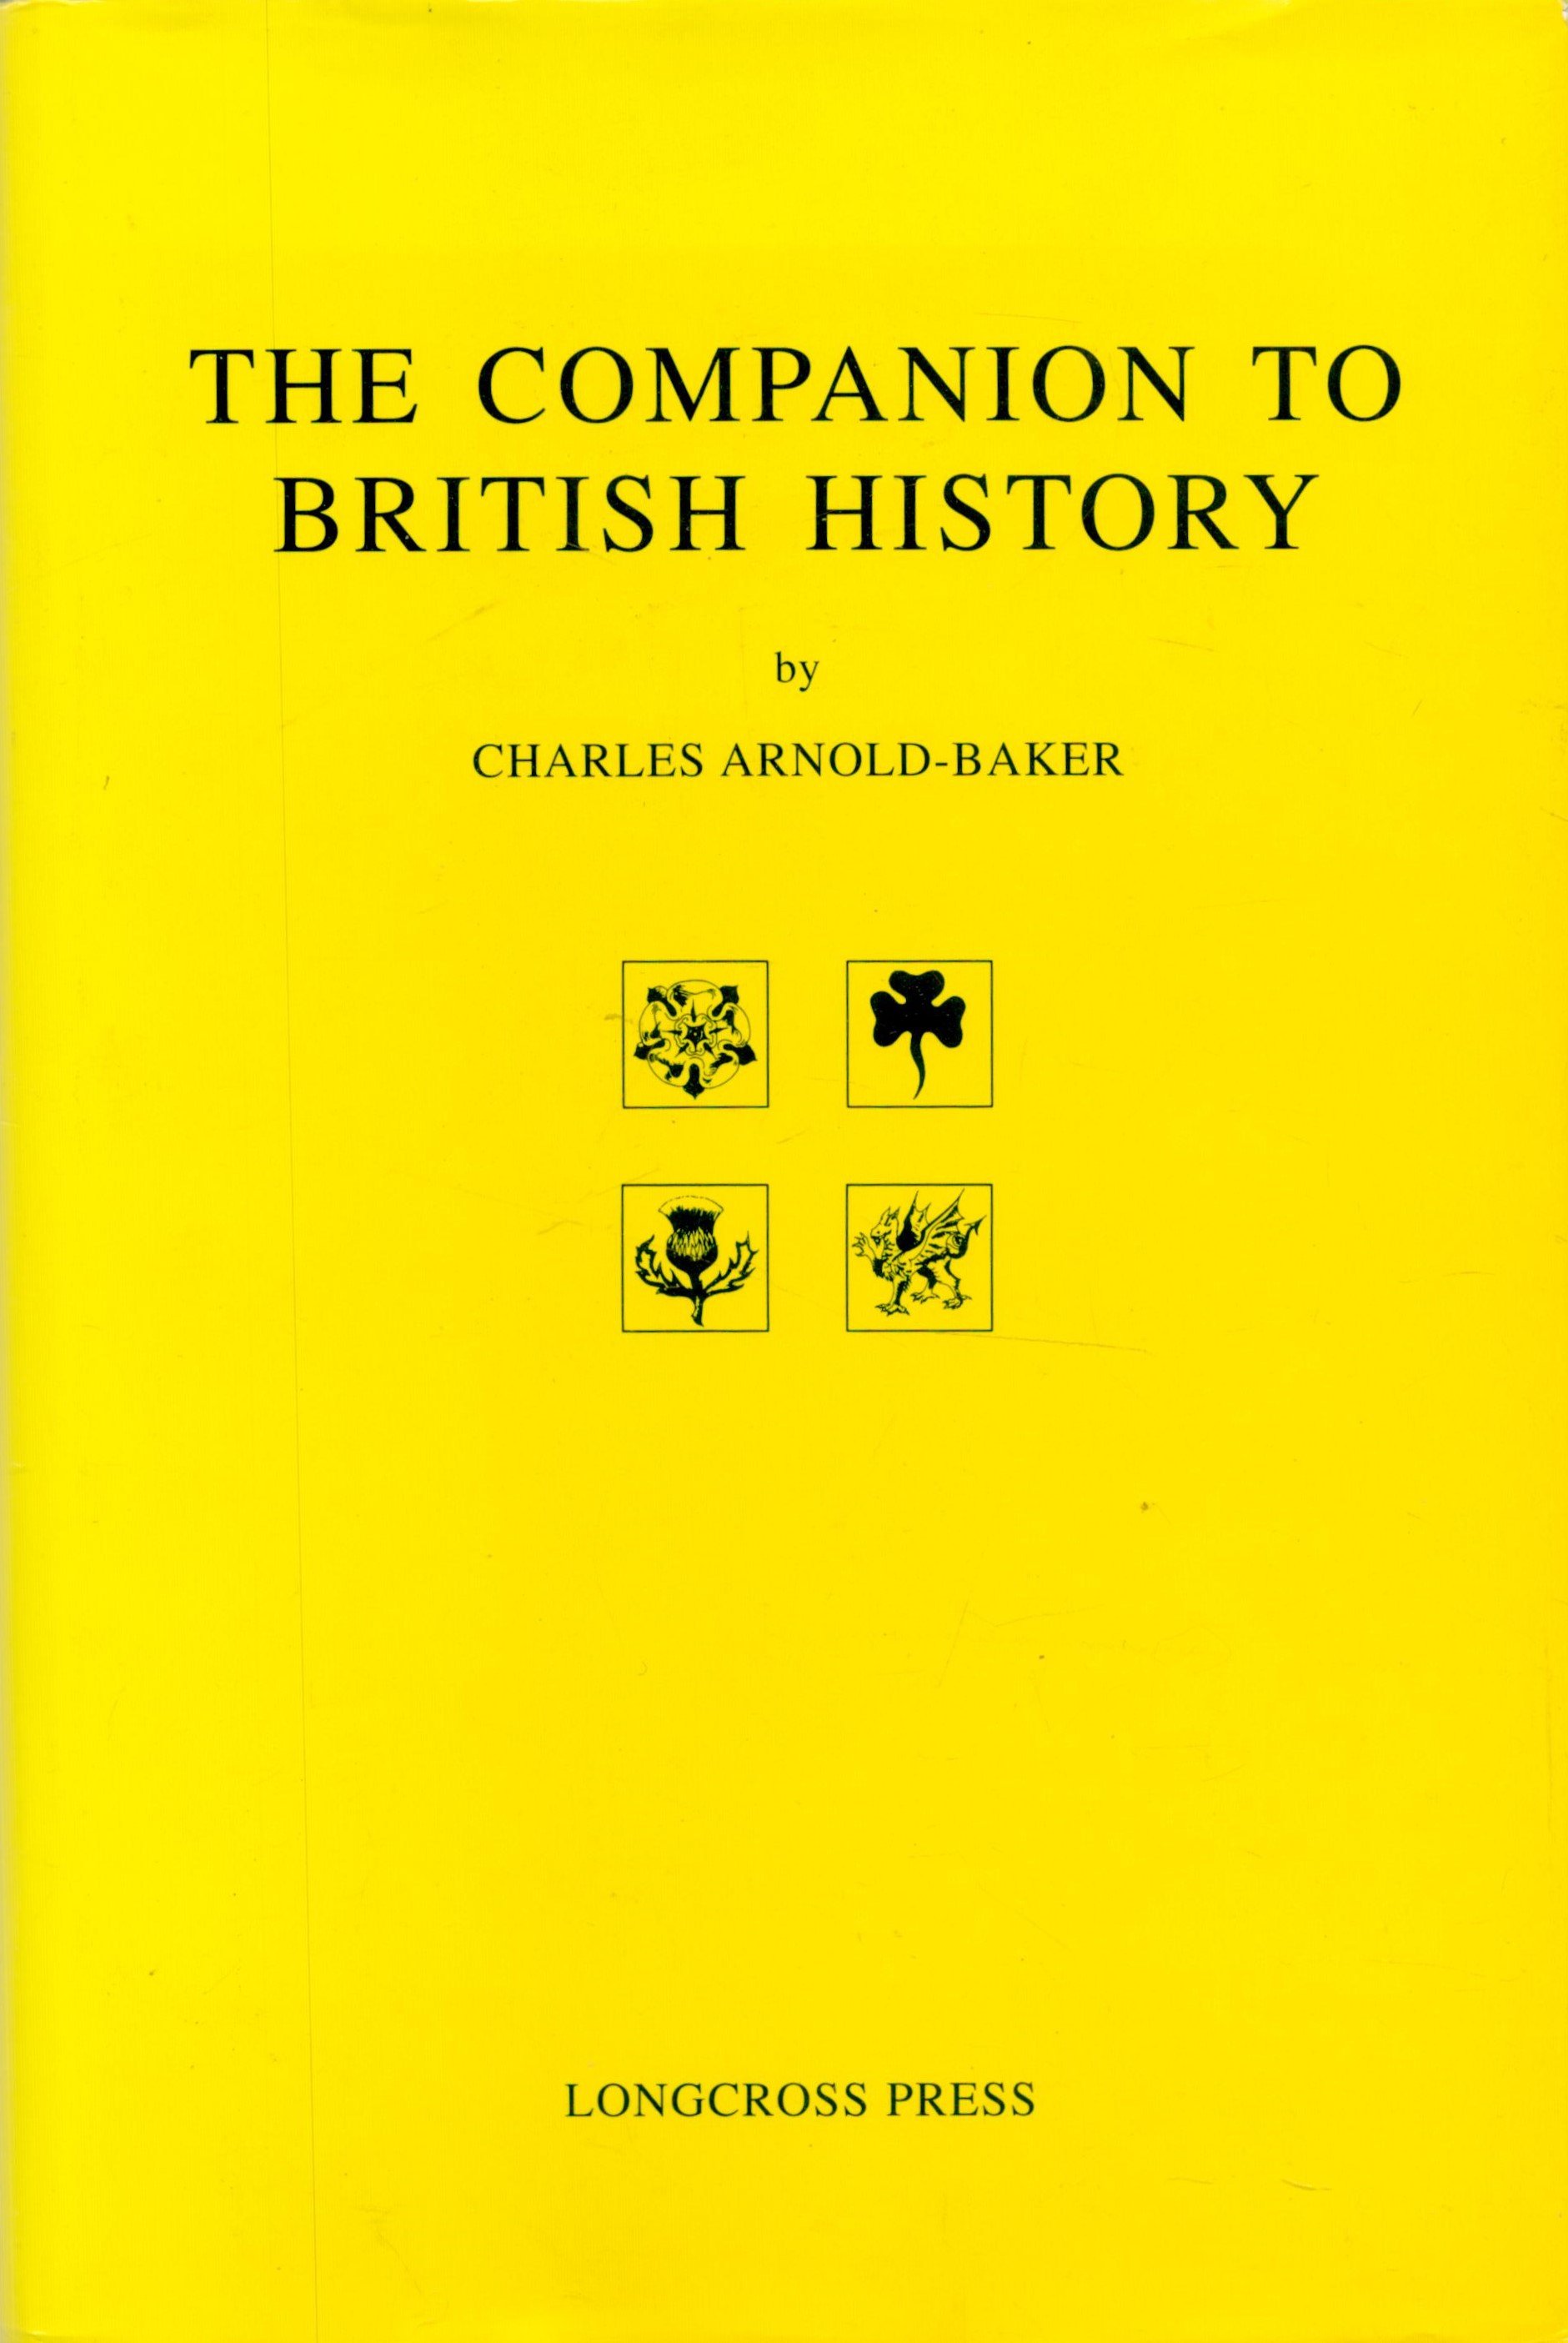 The Companion to British History by Charles Arnold-Baker 1996 First Edition Hardback Book with